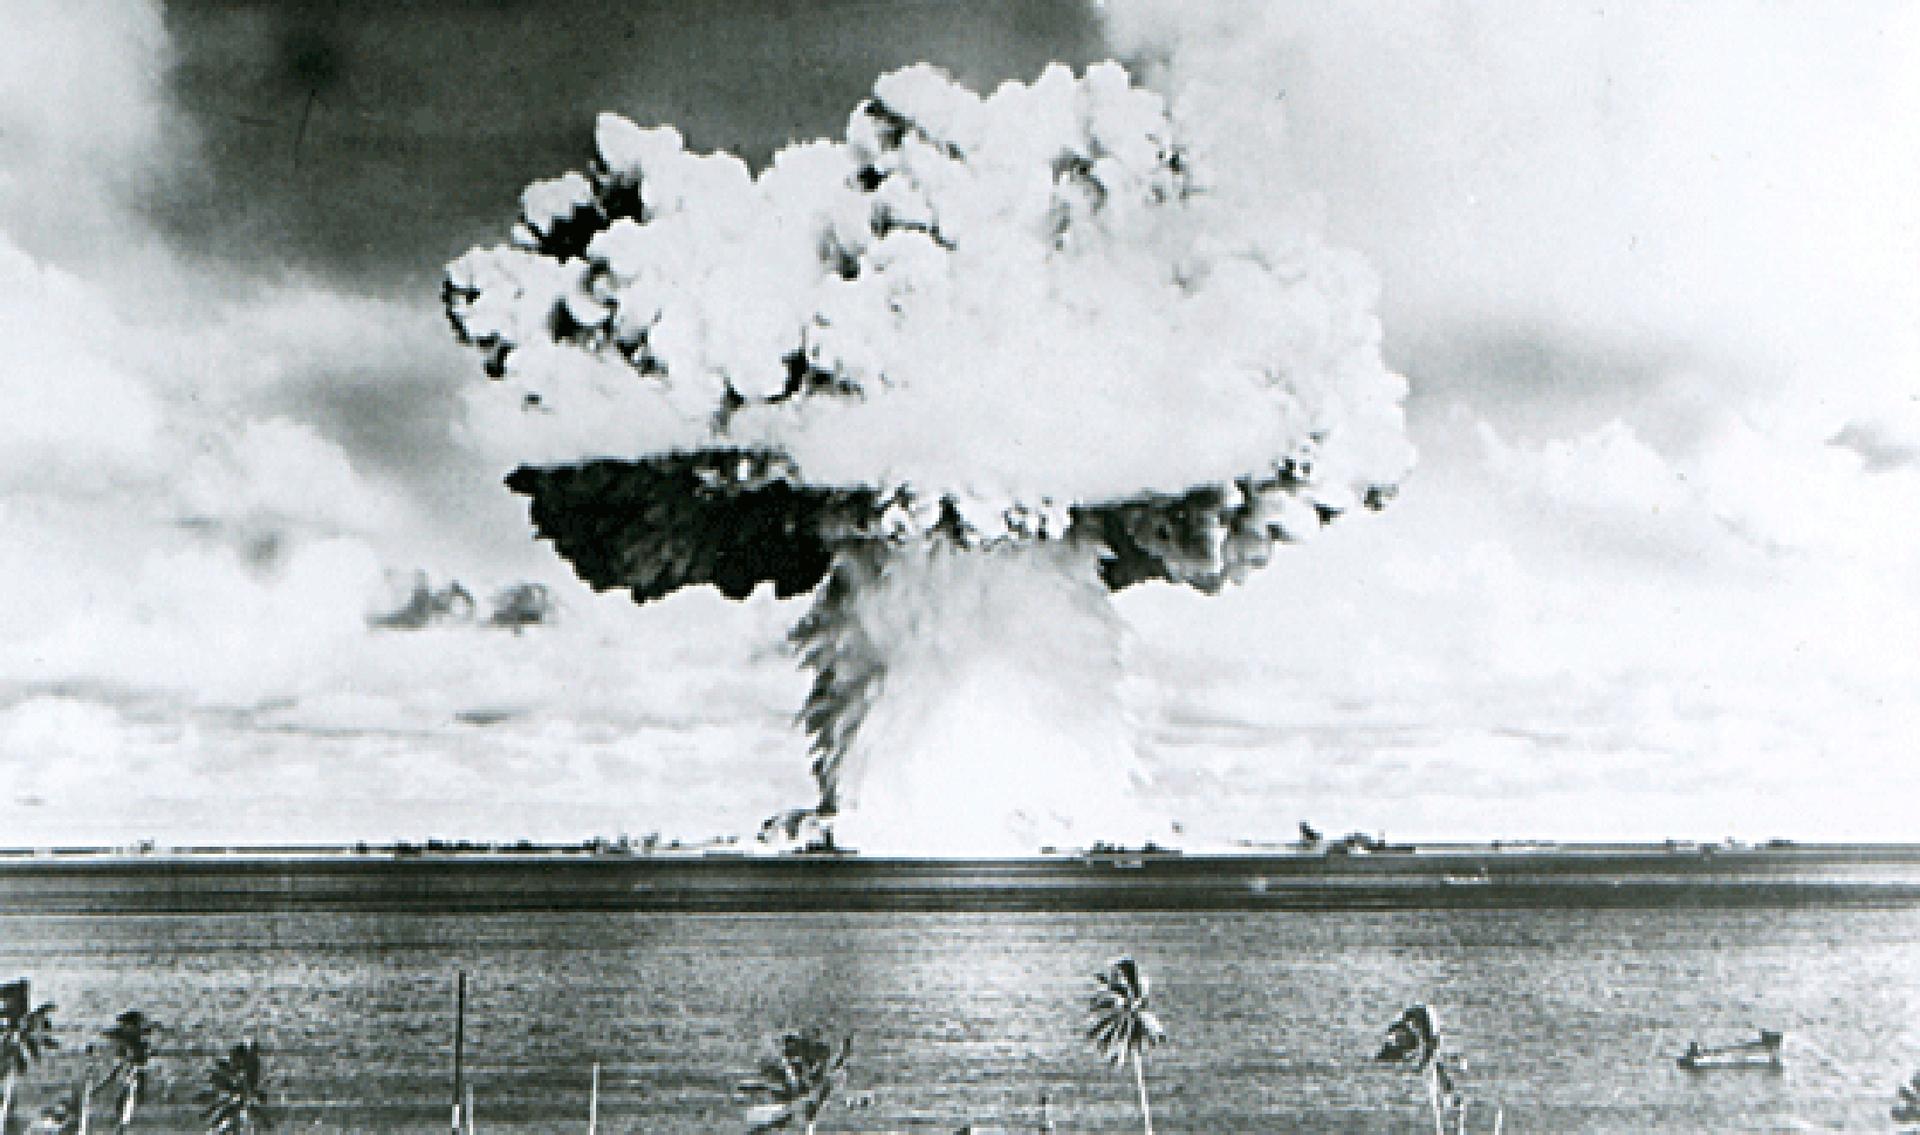 This image shows Baker, the second of the two atomic bomb tests